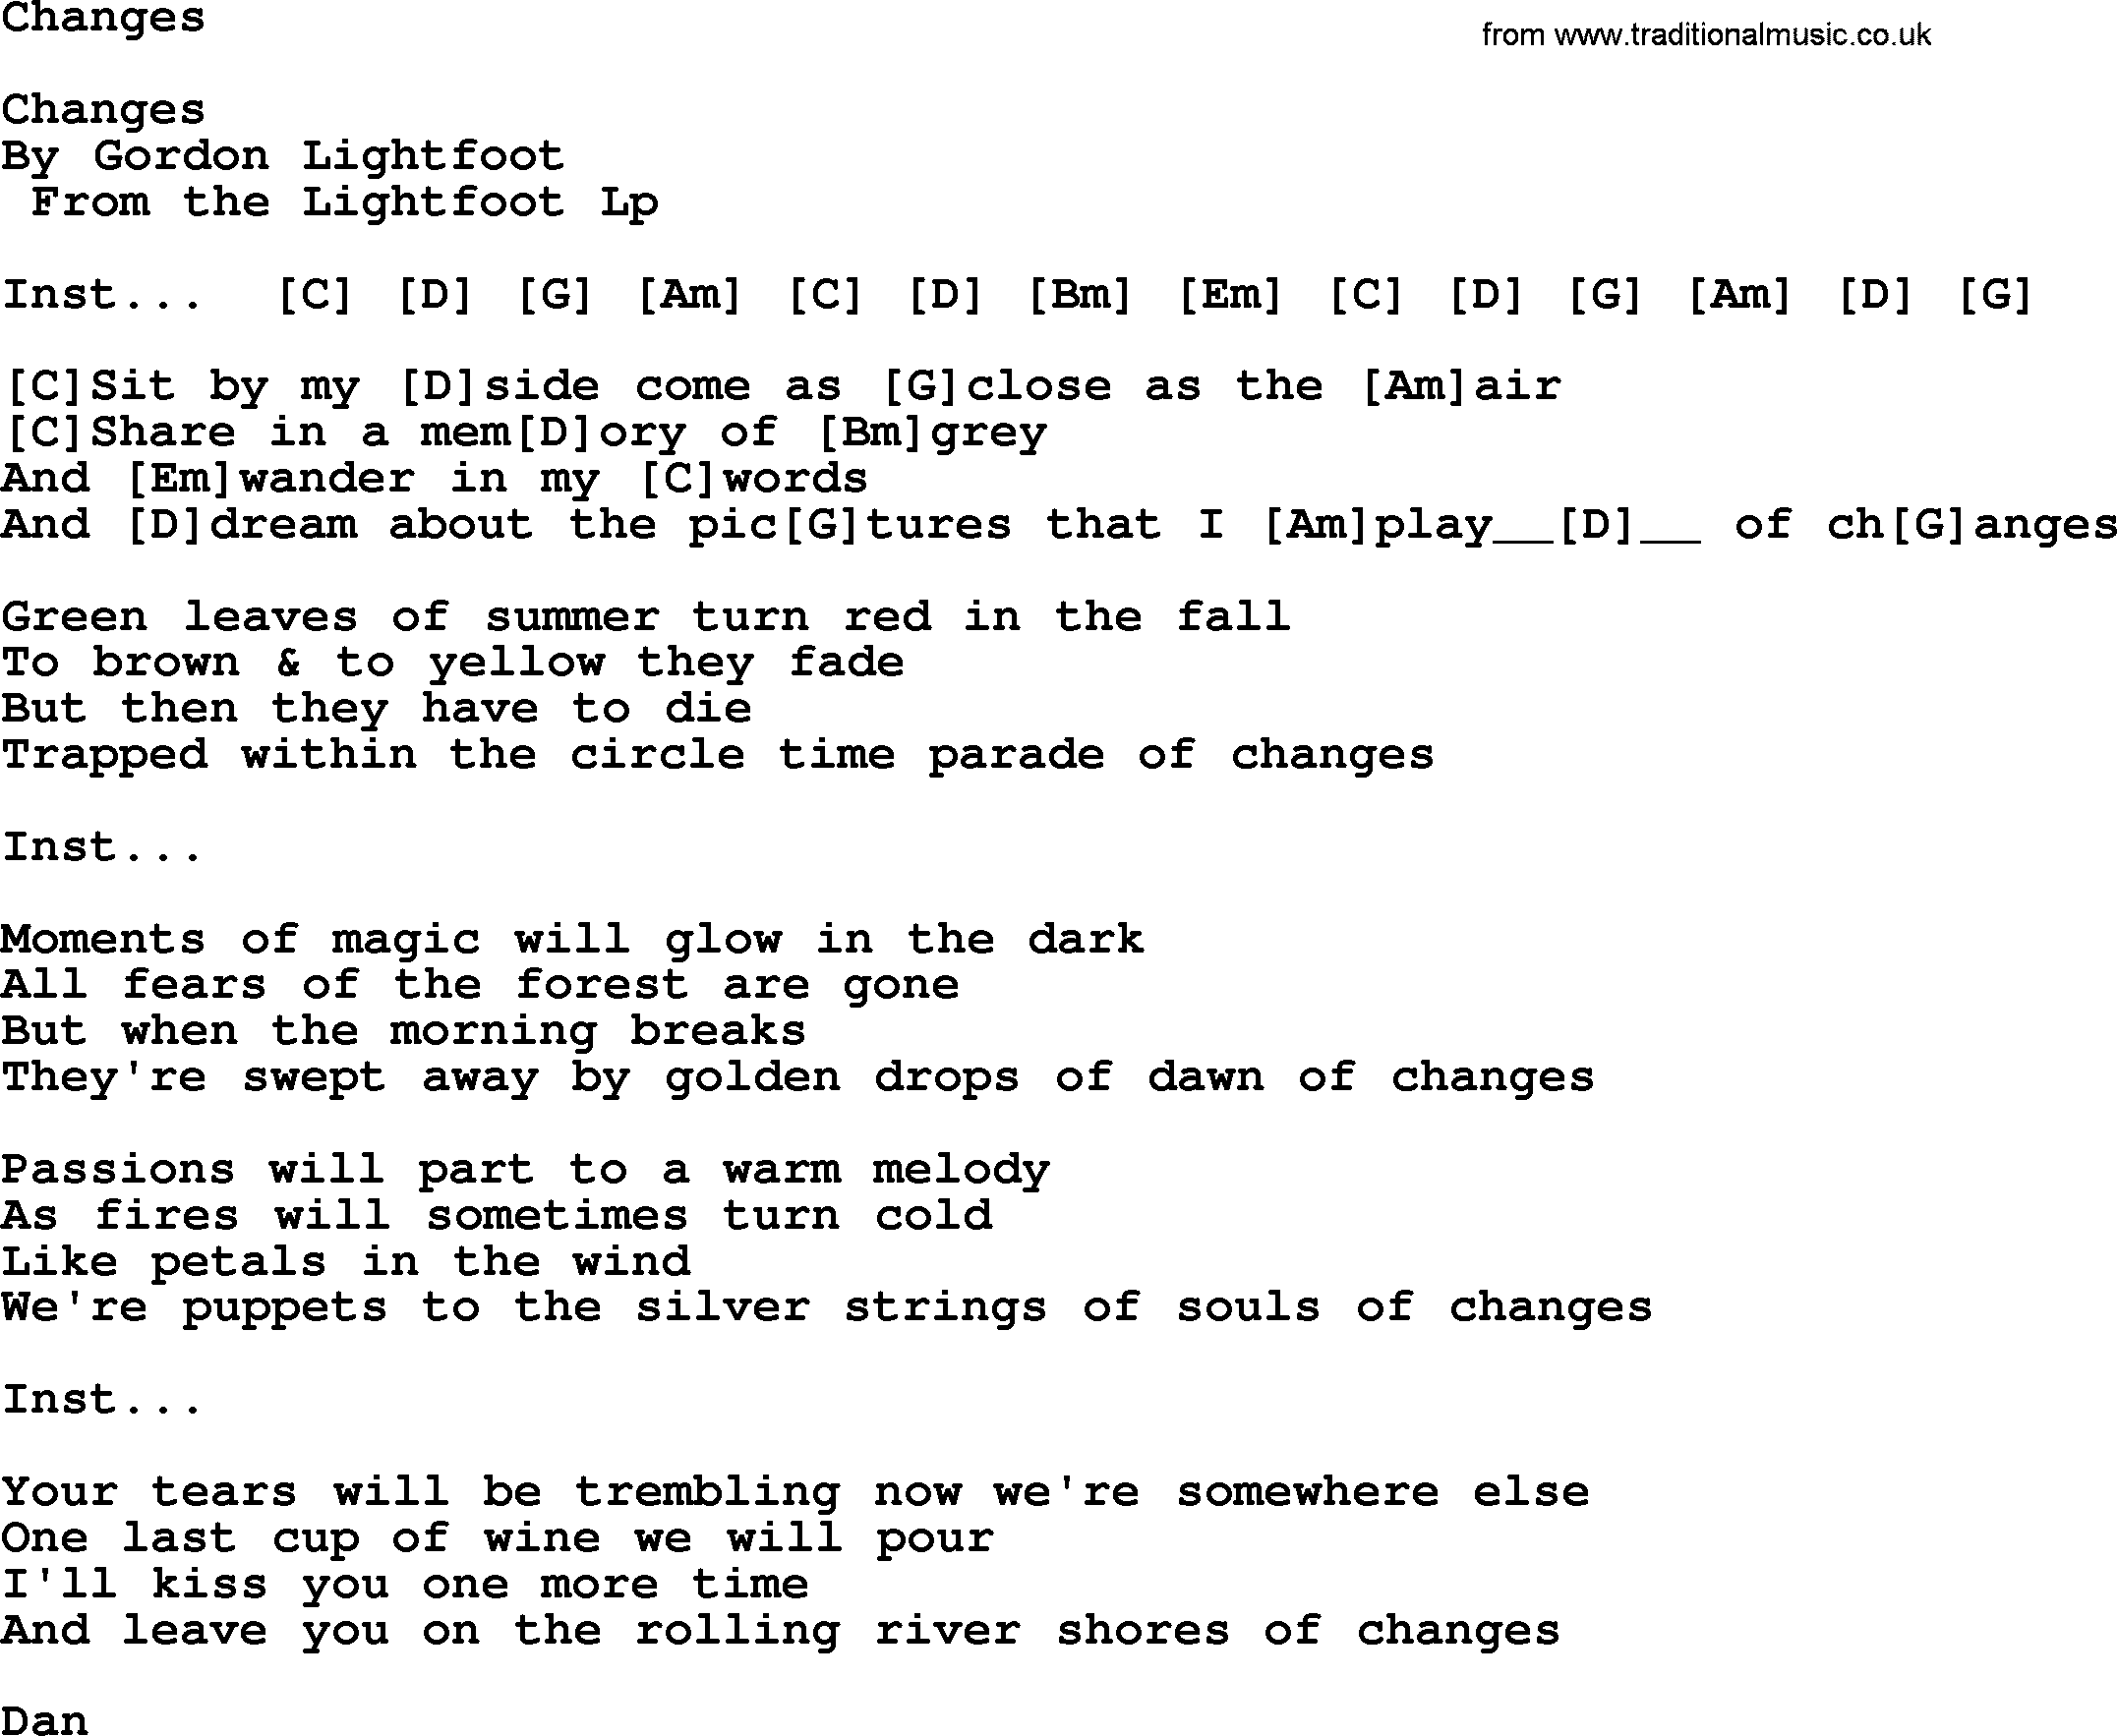 Bluegrass song: Changes, lyrics and chords